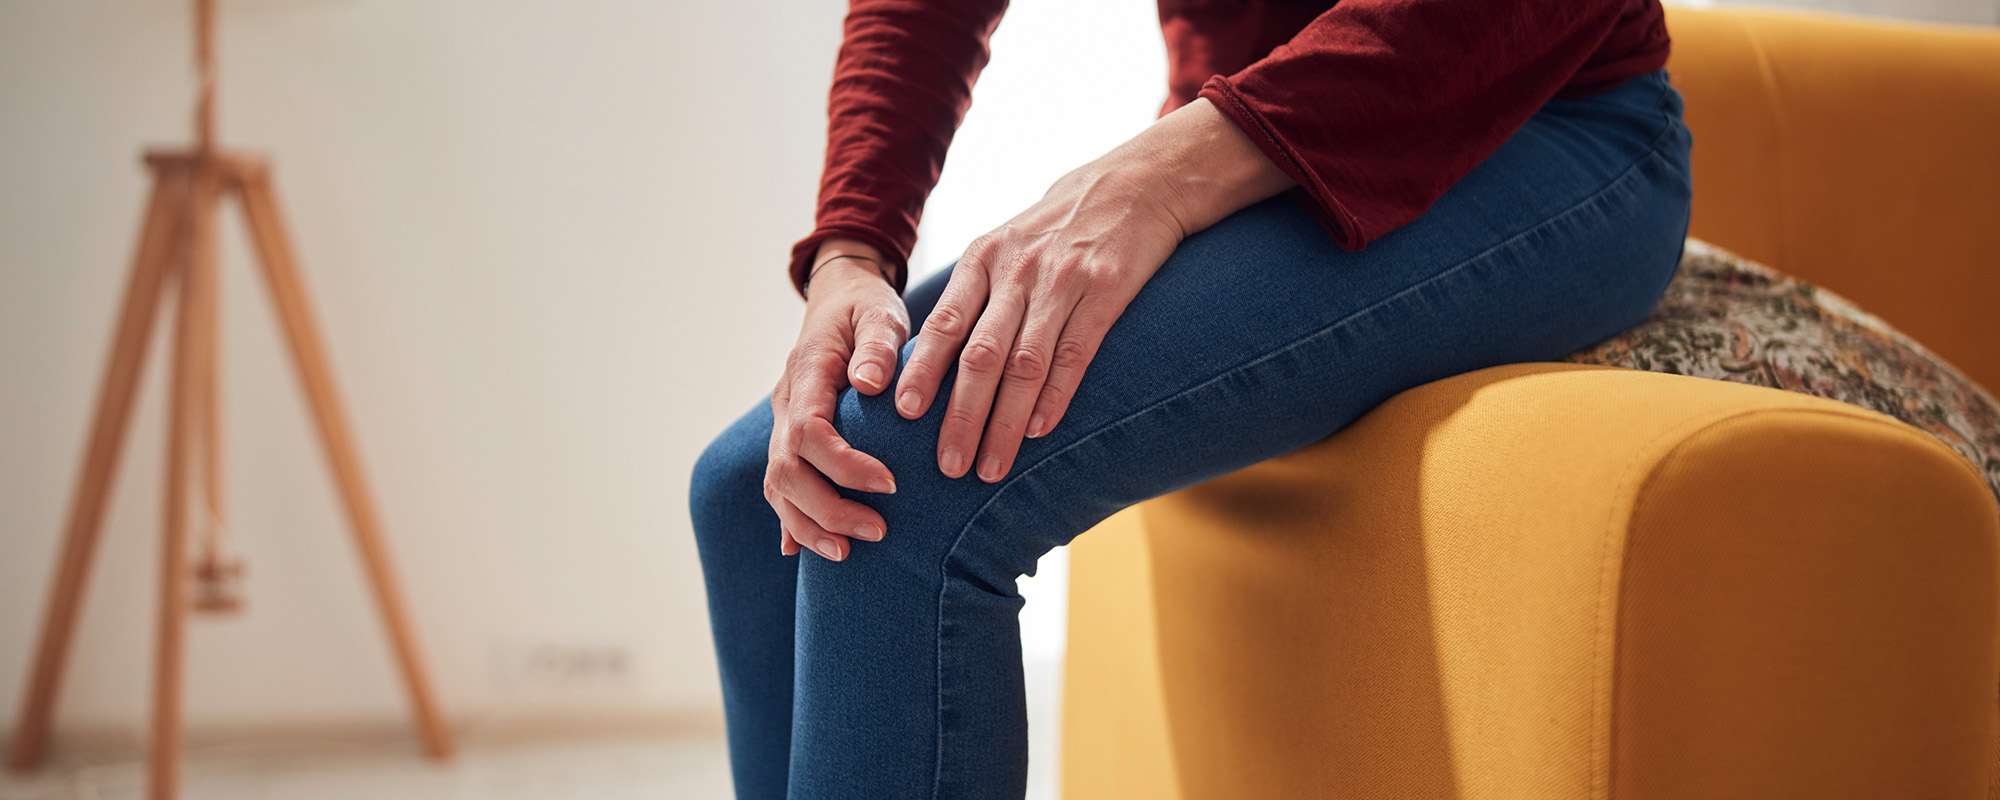 woman with knee and joint pain at home.